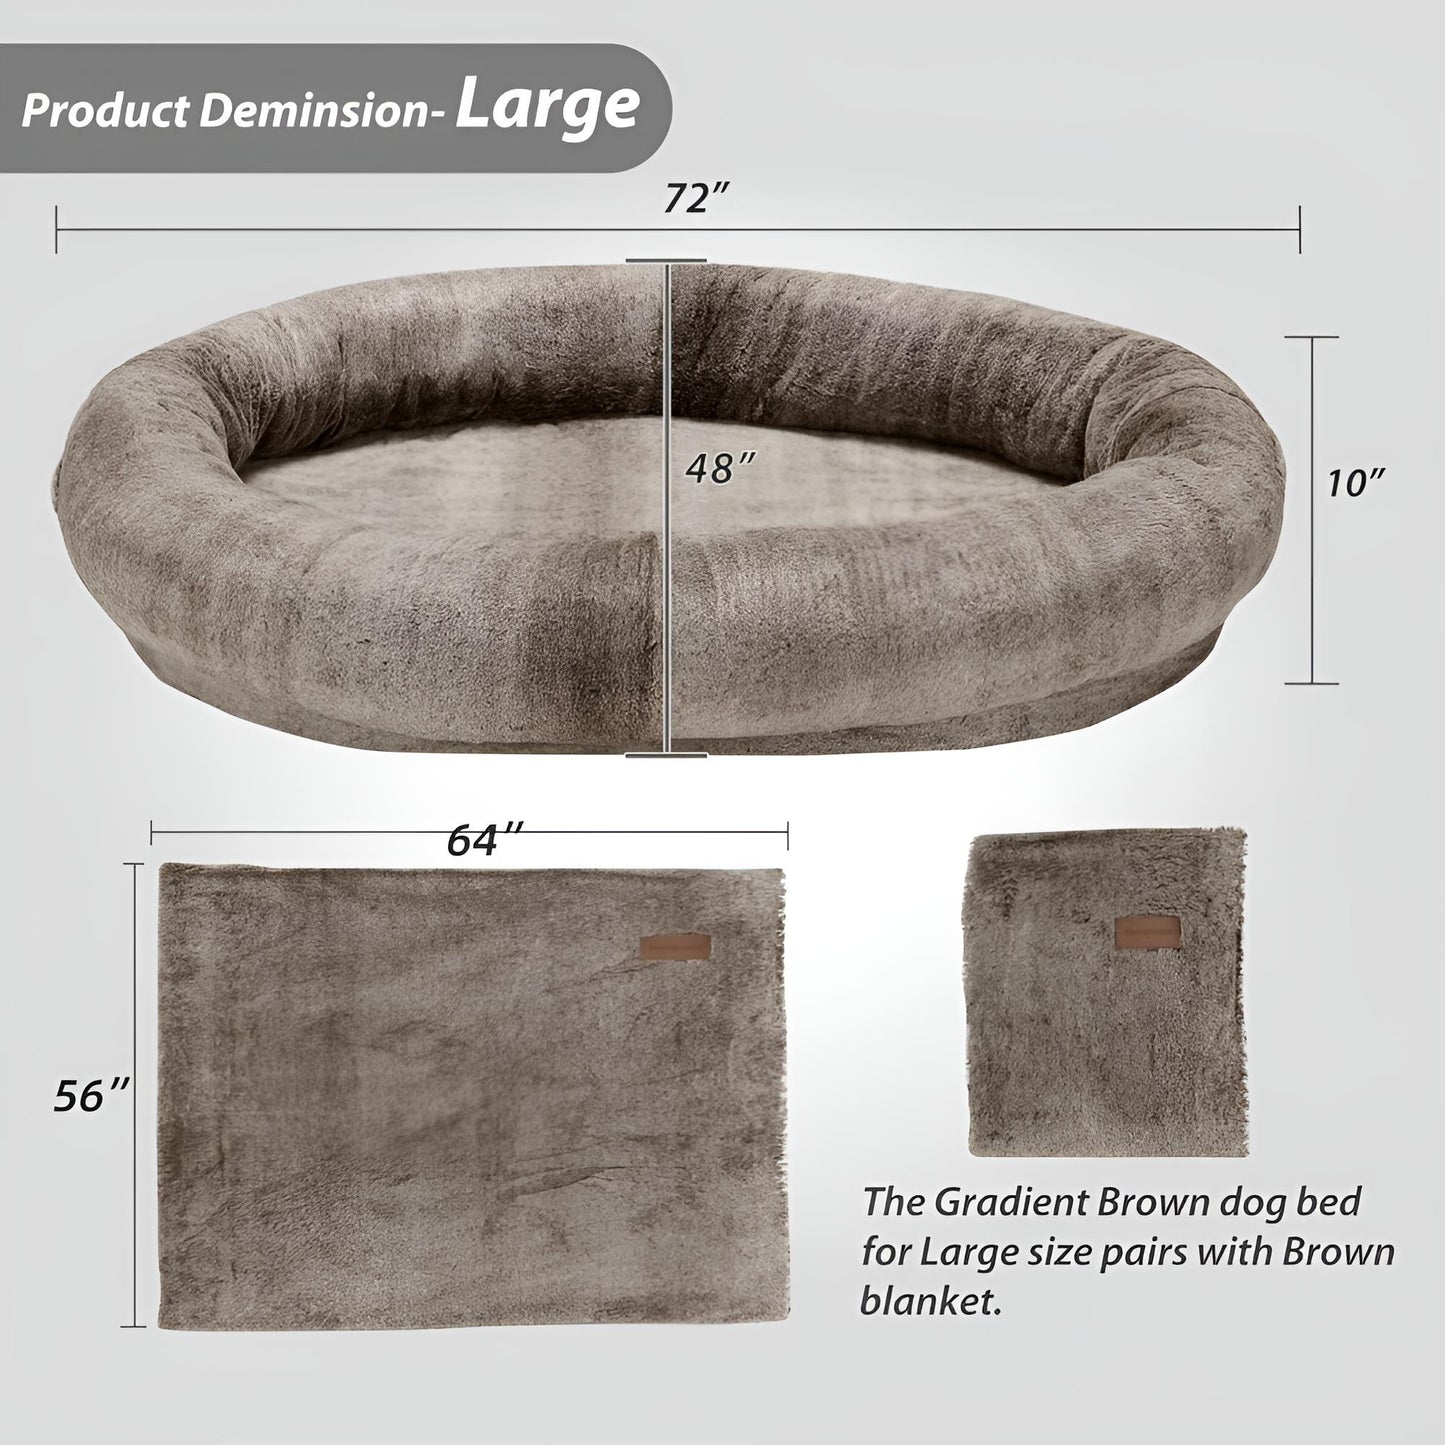 Product dimension – Large Human Dog beds